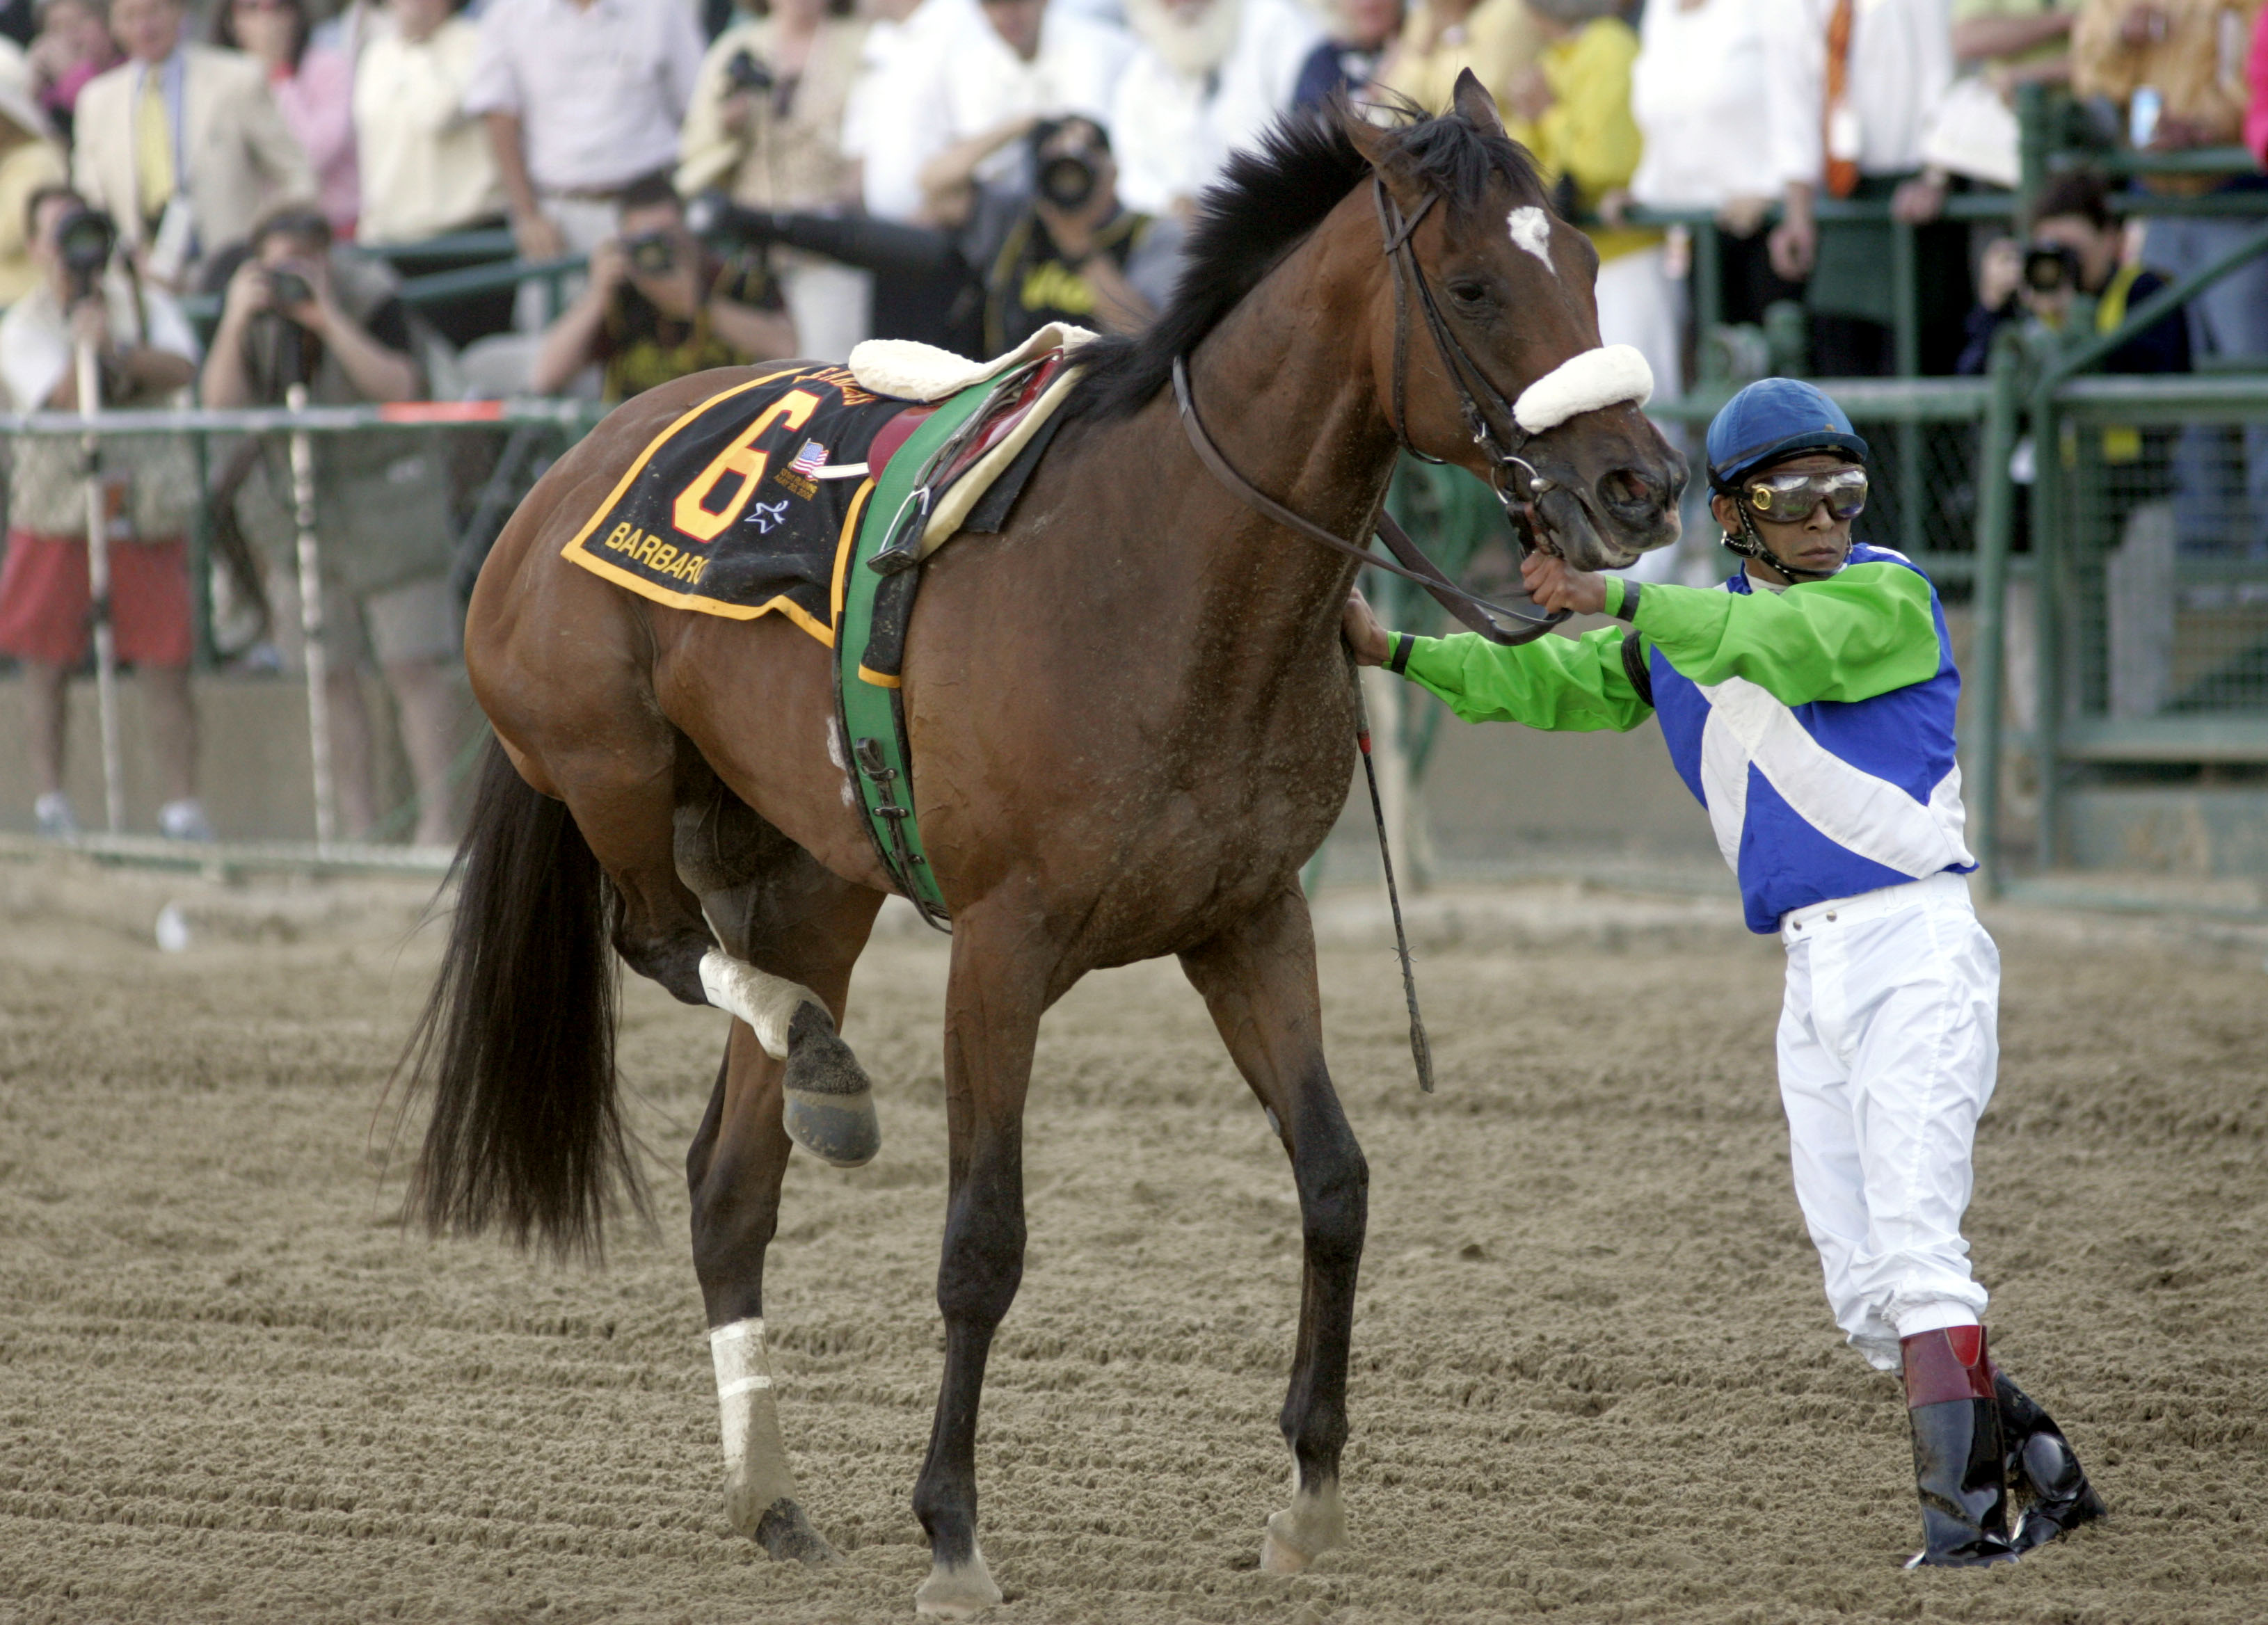 A look at some well-known horse deaths in races ranging from the Kentucky Derby to Breeders’ Cup